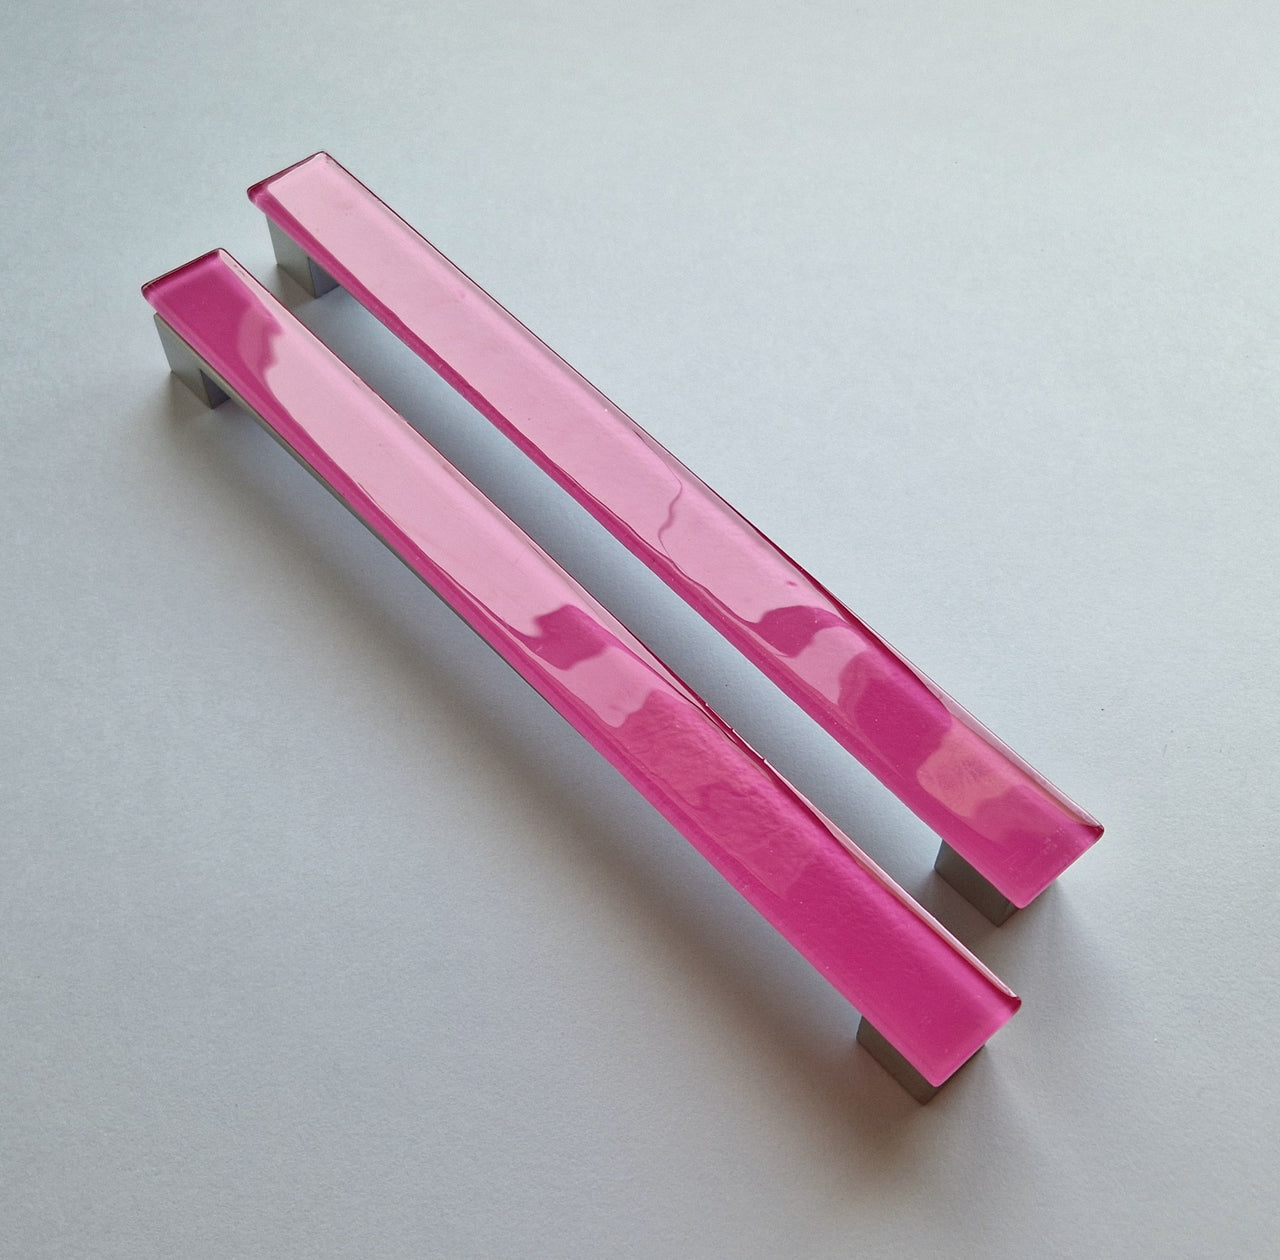 A Set of 2 Large Glass Pulls in Matte Pink. Artistic Fuchsia Pink Furniture Glass Pull - 00--